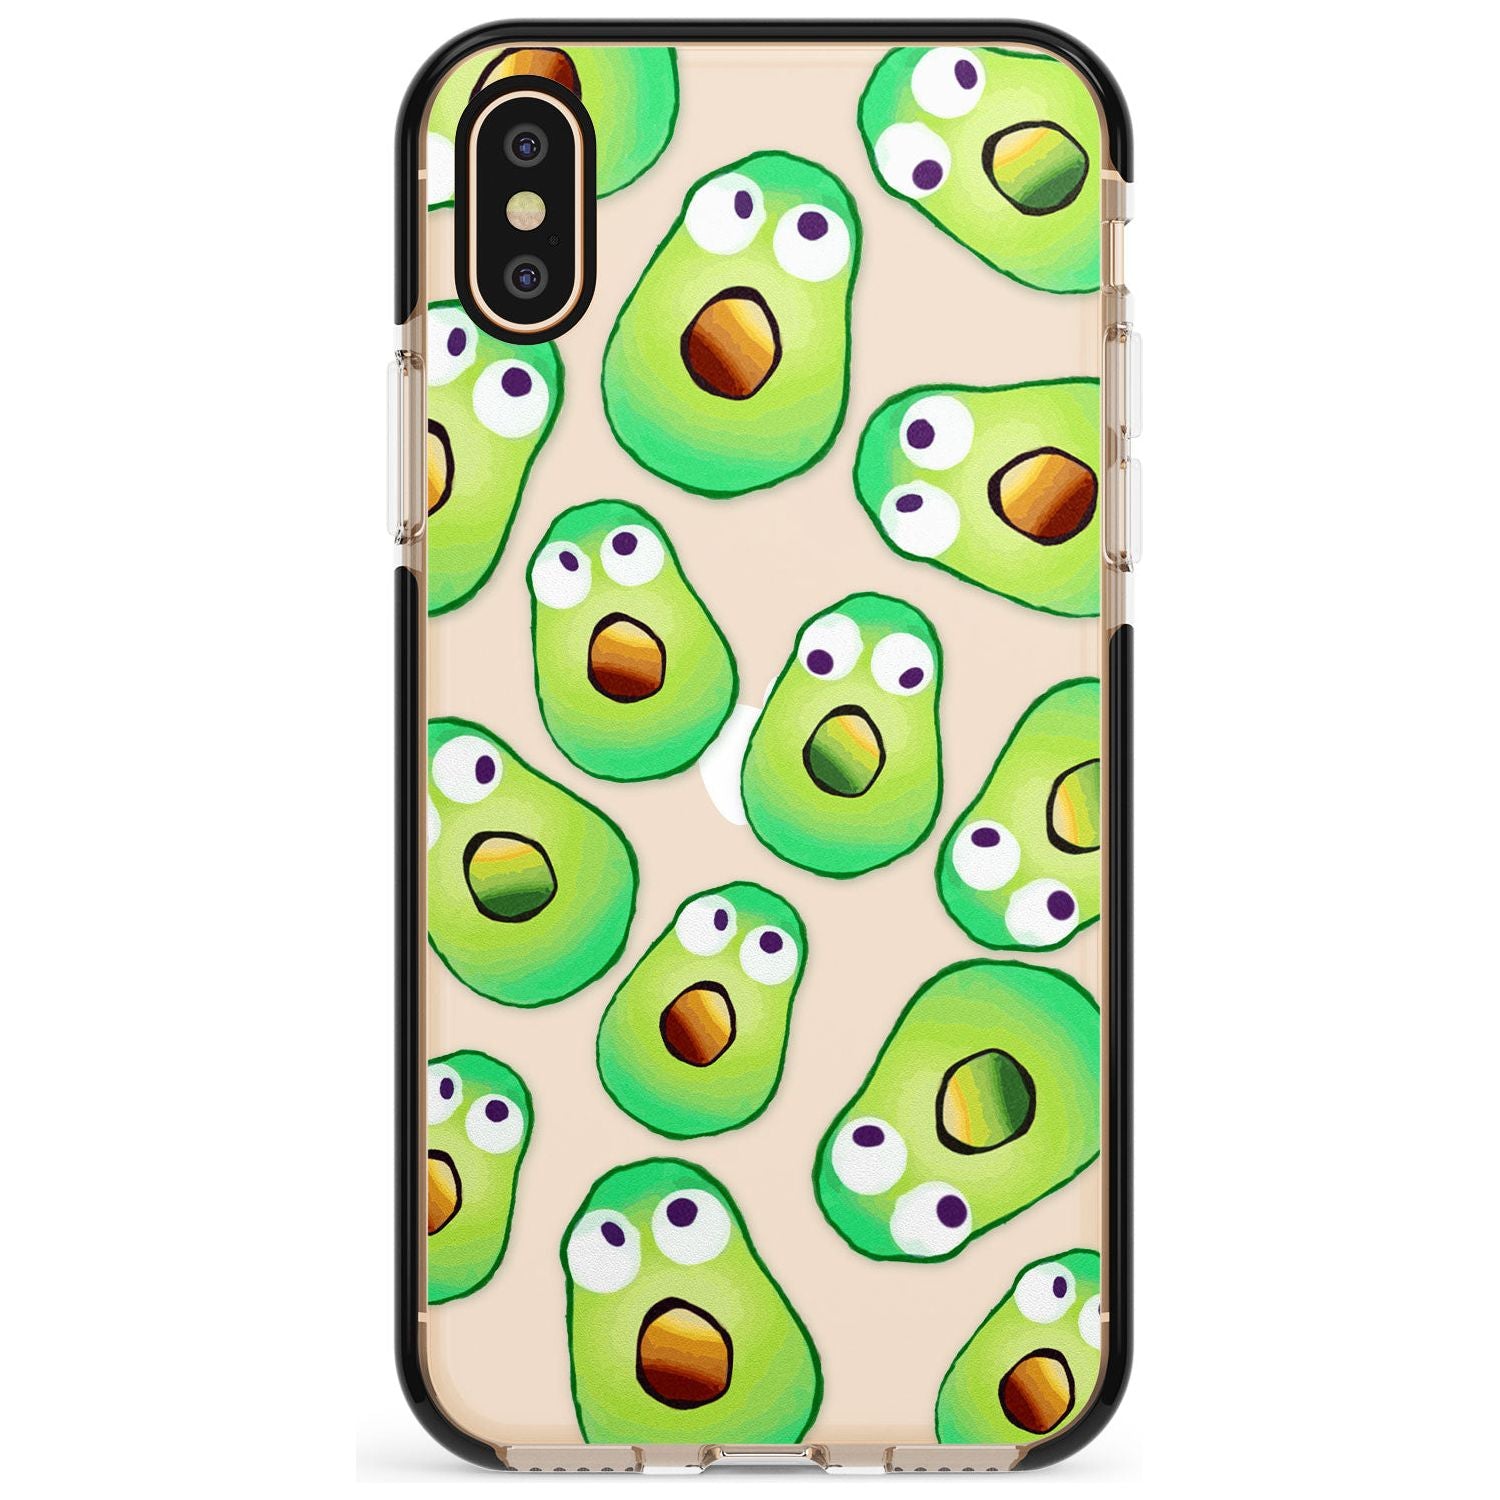 Shocked Avocados Black Impact Phone Case for iPhone X XS Max XR